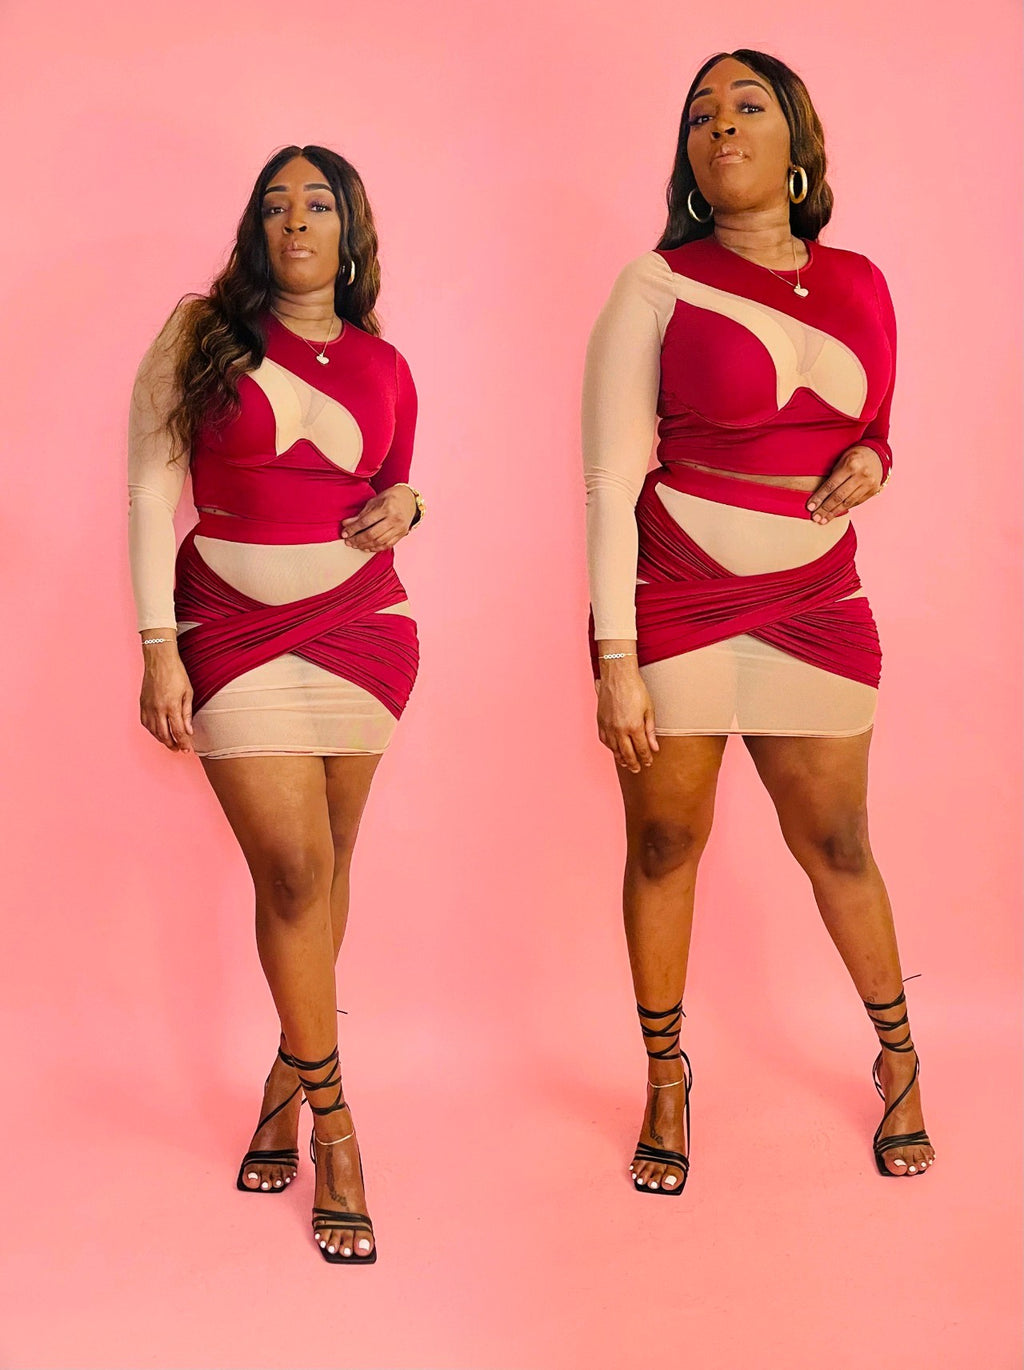 Show out in this head turner, in this WINE WIRE TWO PIECE LONG SLEEVE CROP TOP SHIRT AND SKIRT SET  Mesh details   S 4/6 M 8/10 L 12/14  MODEL IS 5”5 155lbs wearing a large  Some stretch.